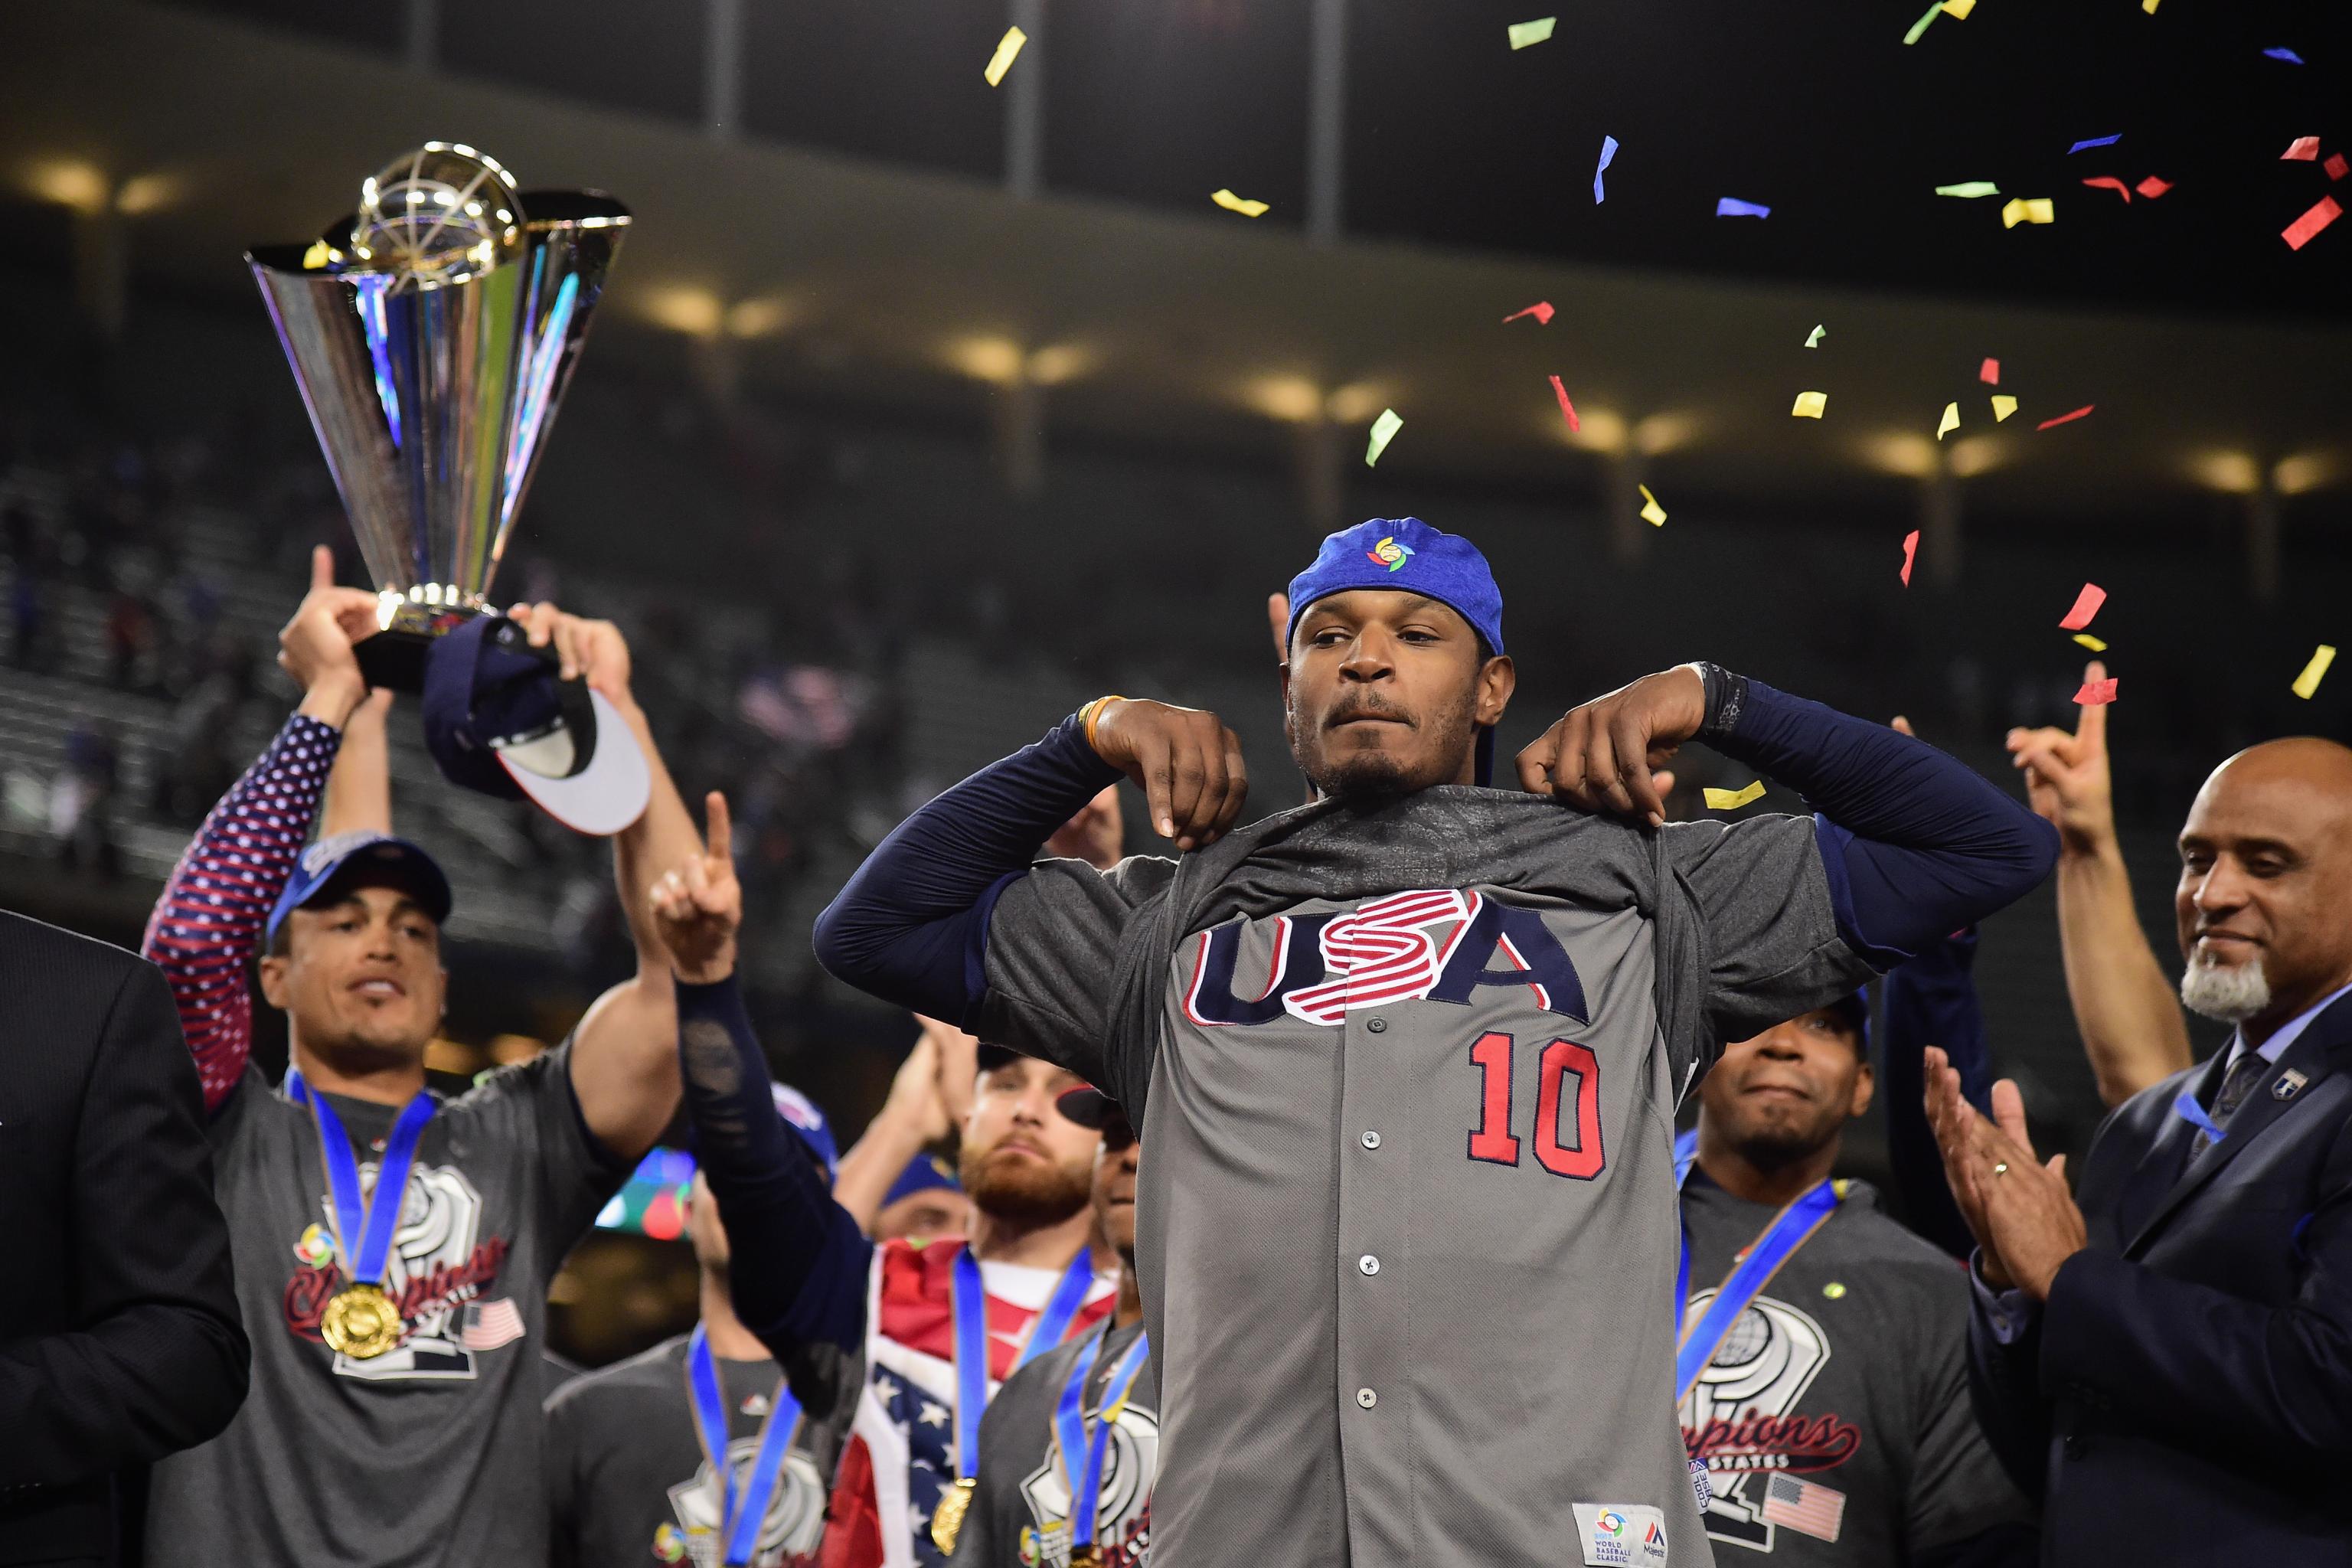 Passion of 2017 World Baseball Classic Can Help Fuel the Future